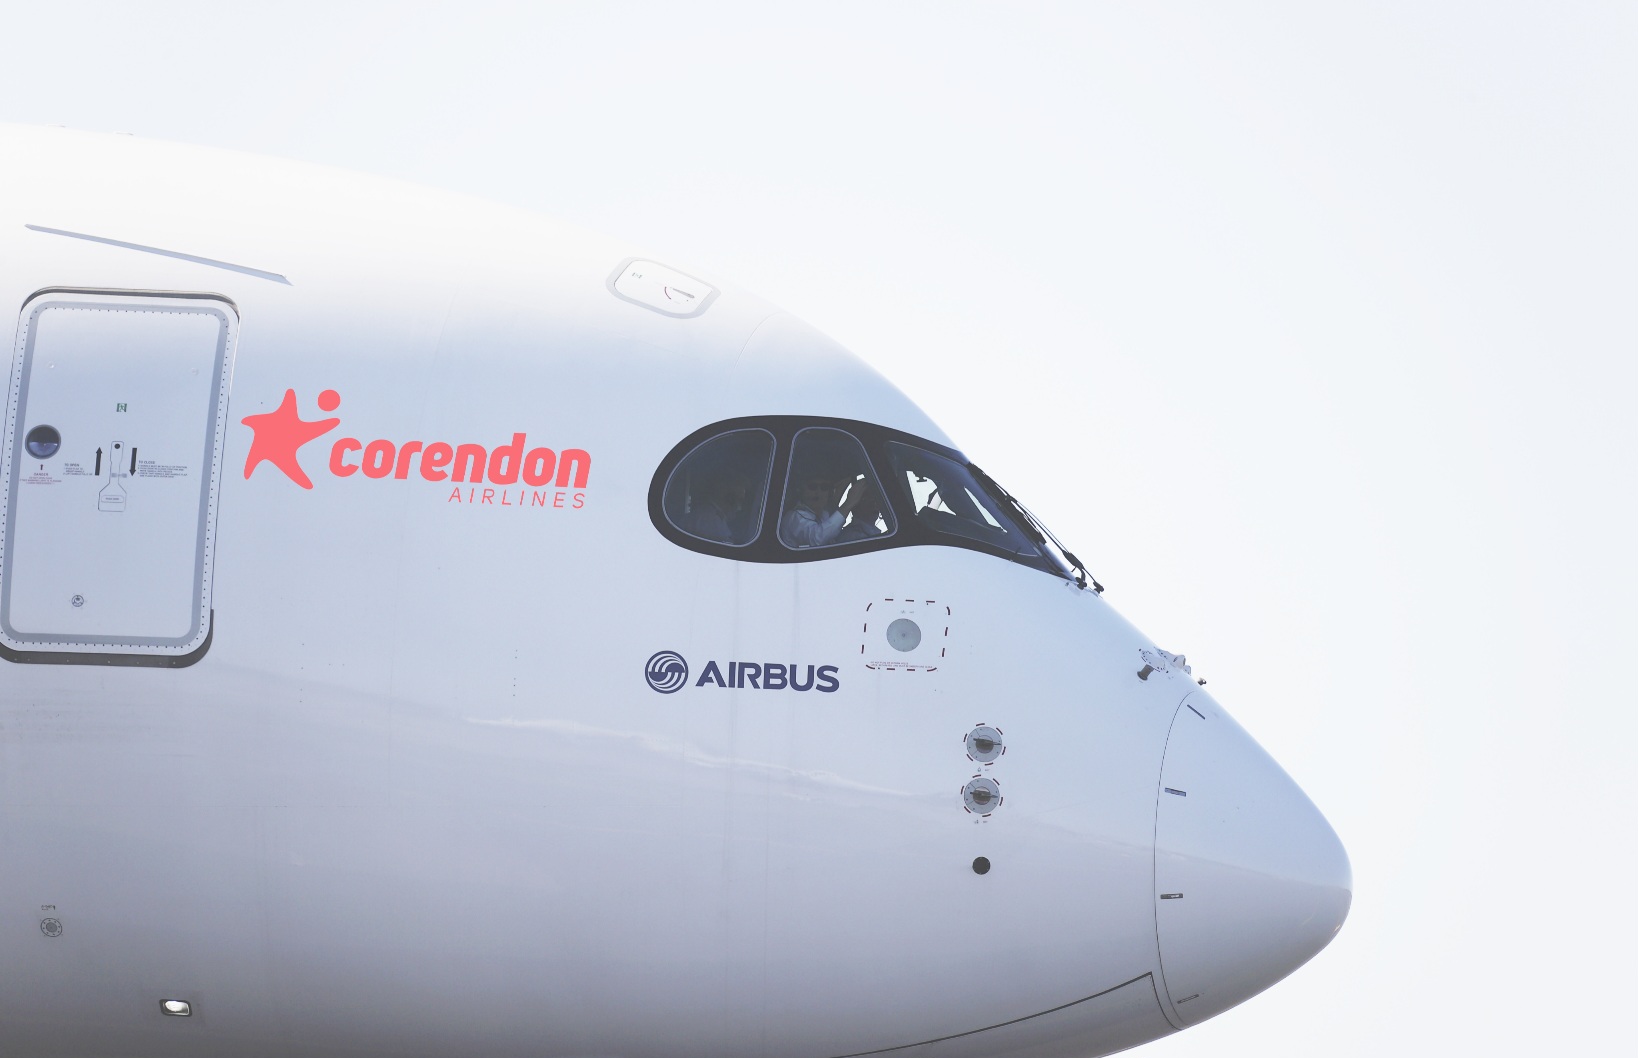 “Corendon wants to lease an Airbus A350 for flights to Curaçao”